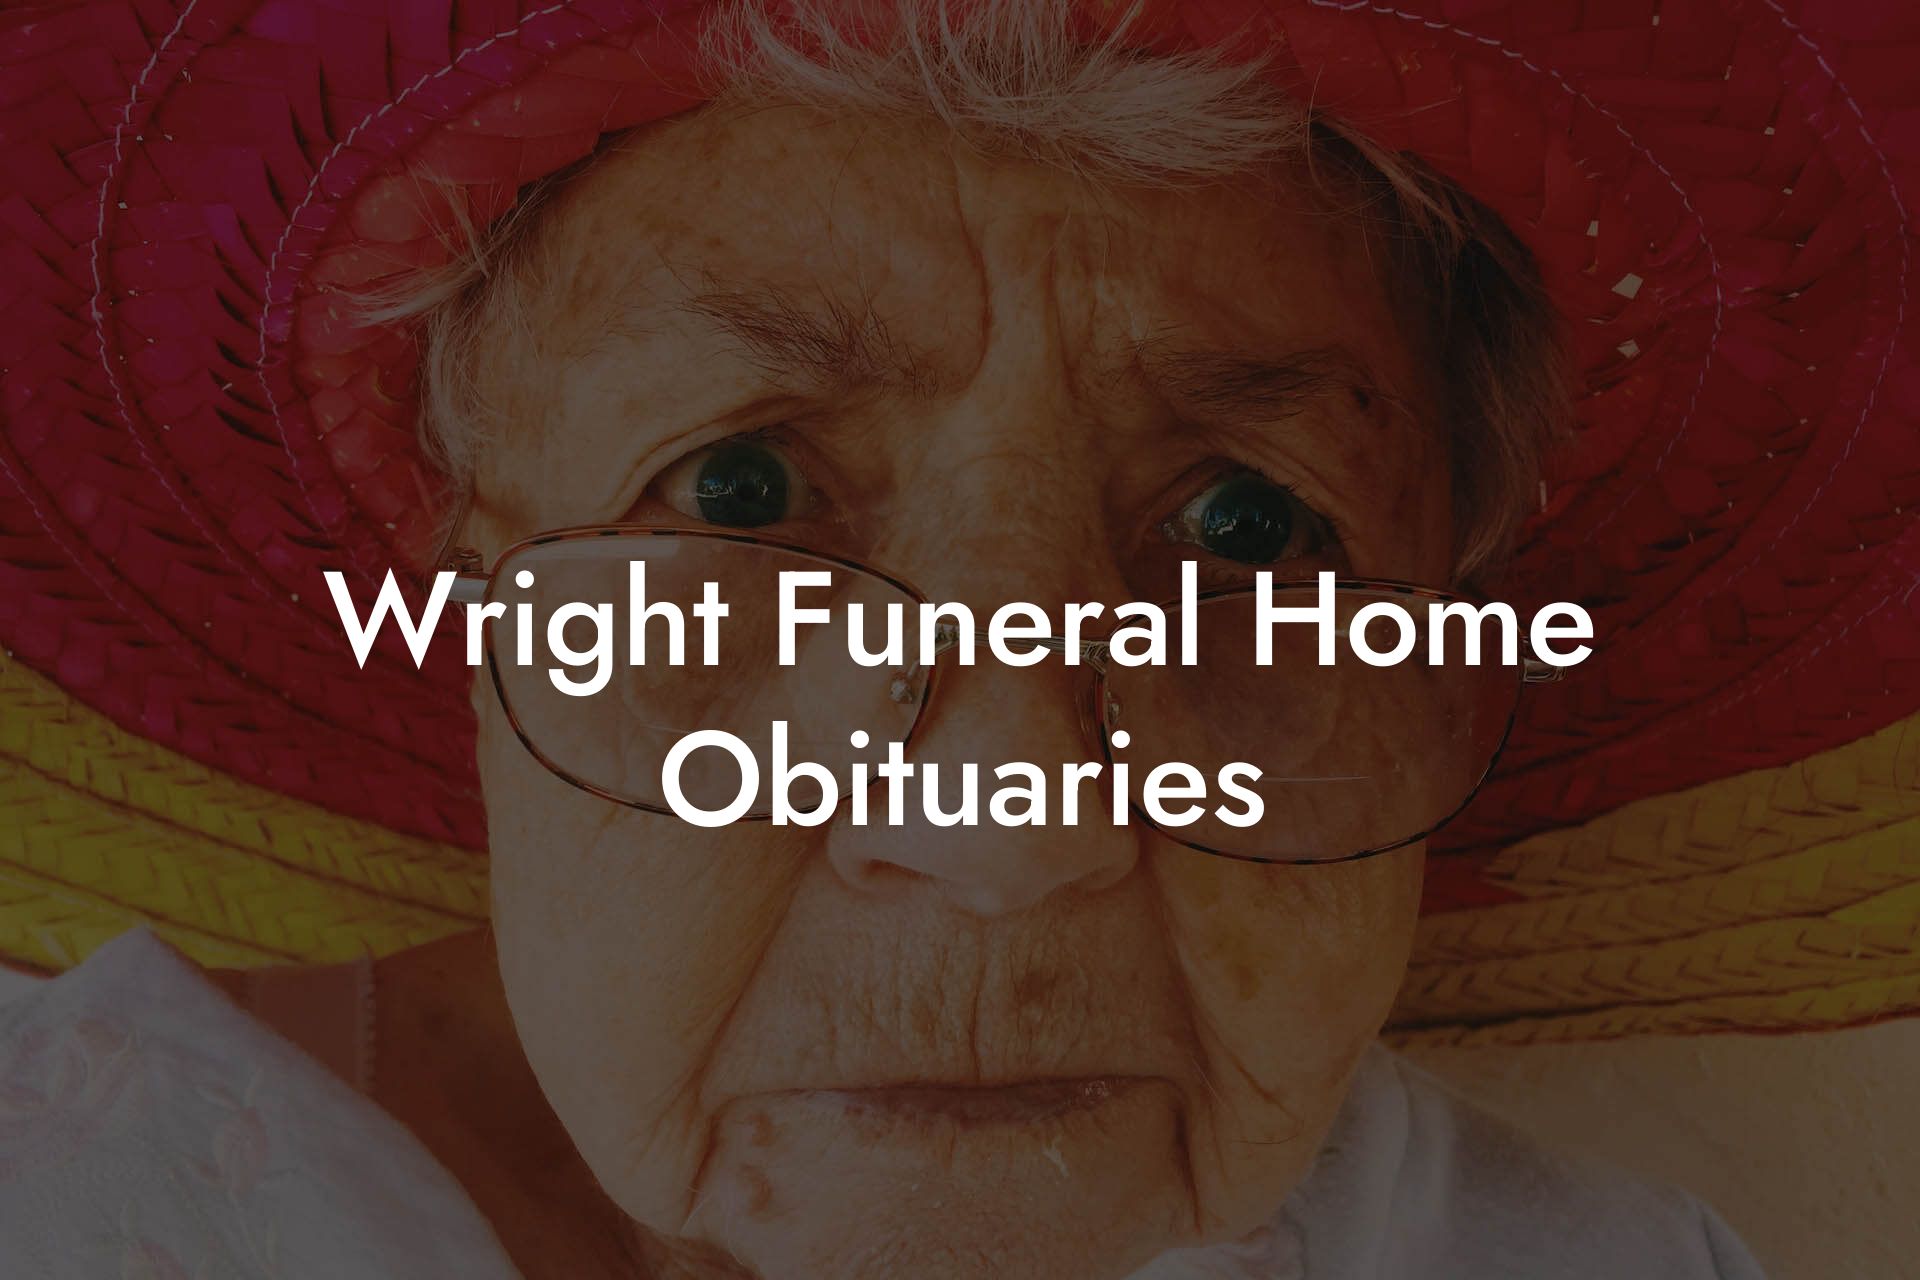 Wright Funeral Home Obituaries